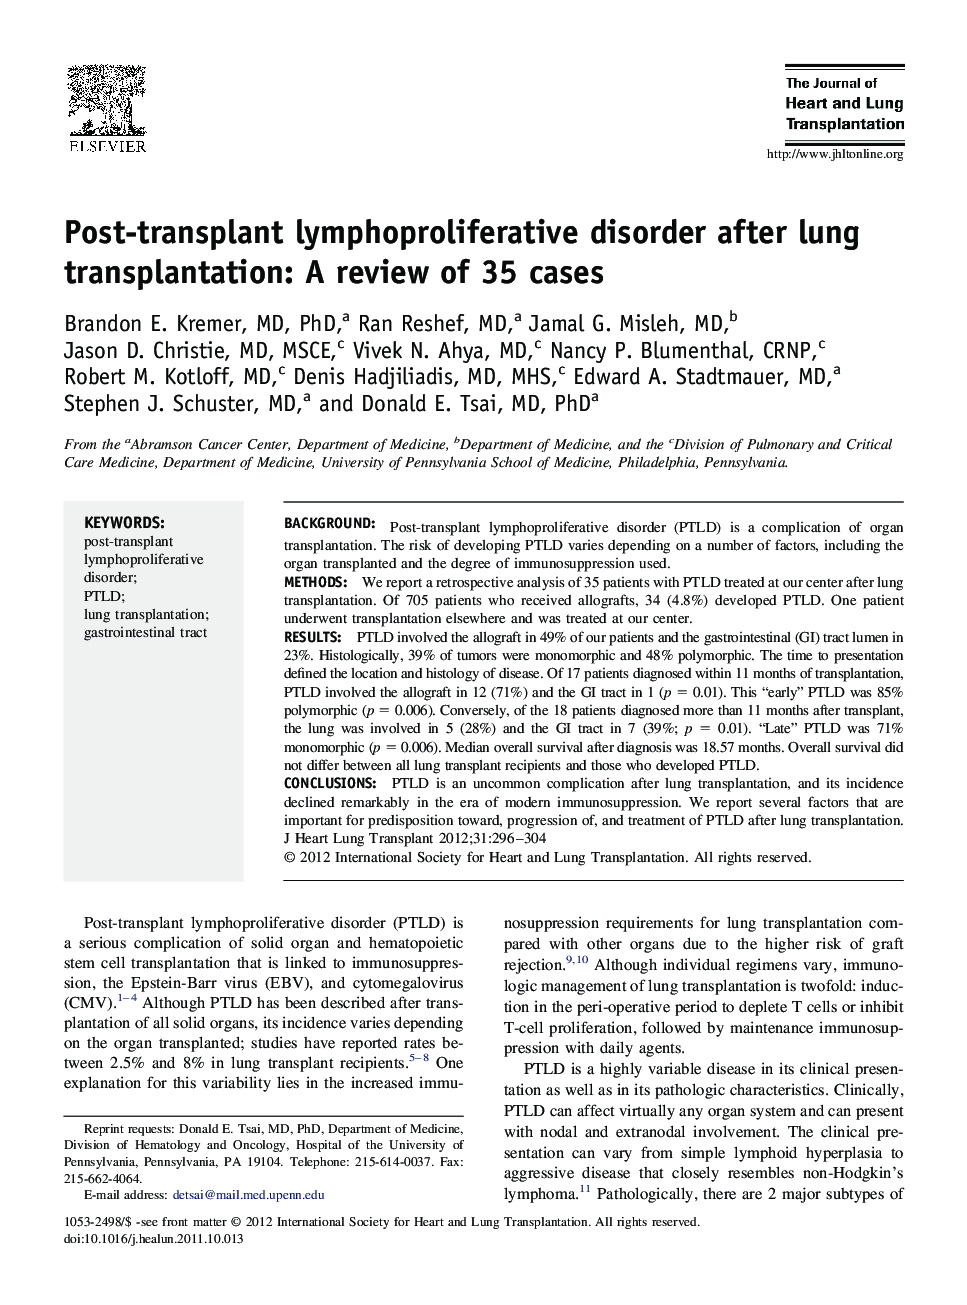 Post-transplant lymphoproliferative disorder after lung transplantation: A review of 35 cases